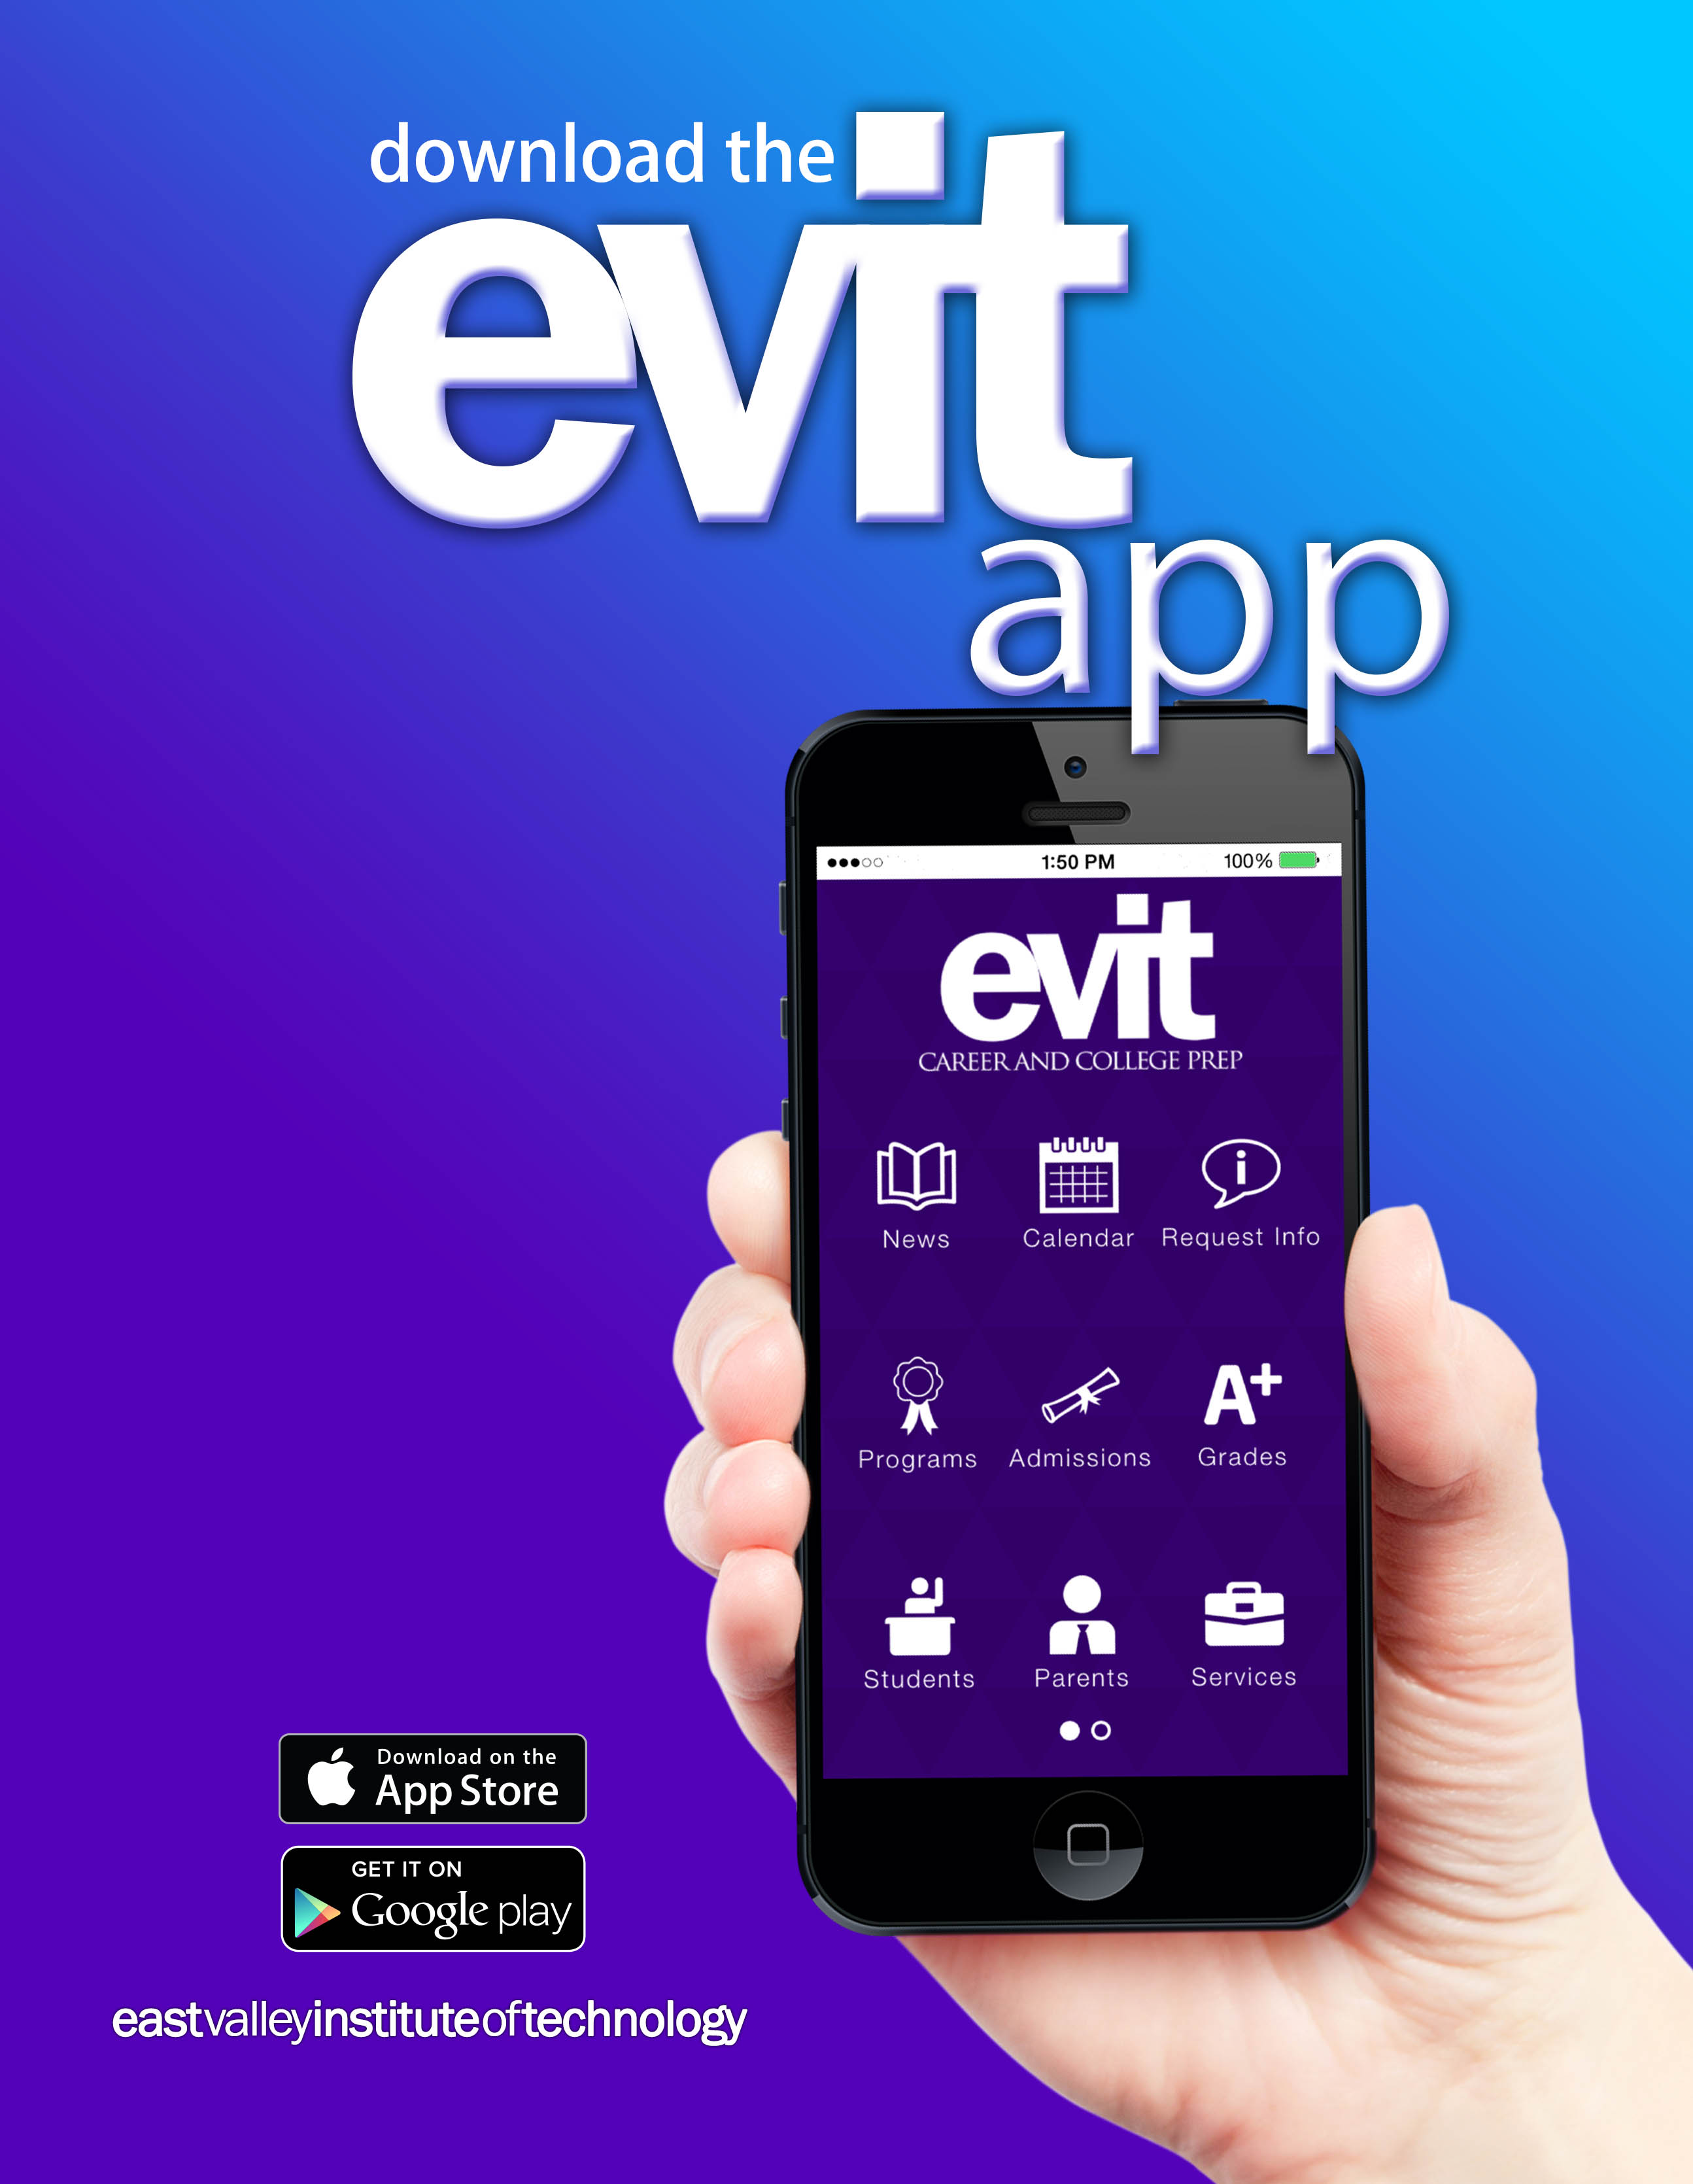 EVIT App - East Valley Institute of Technology